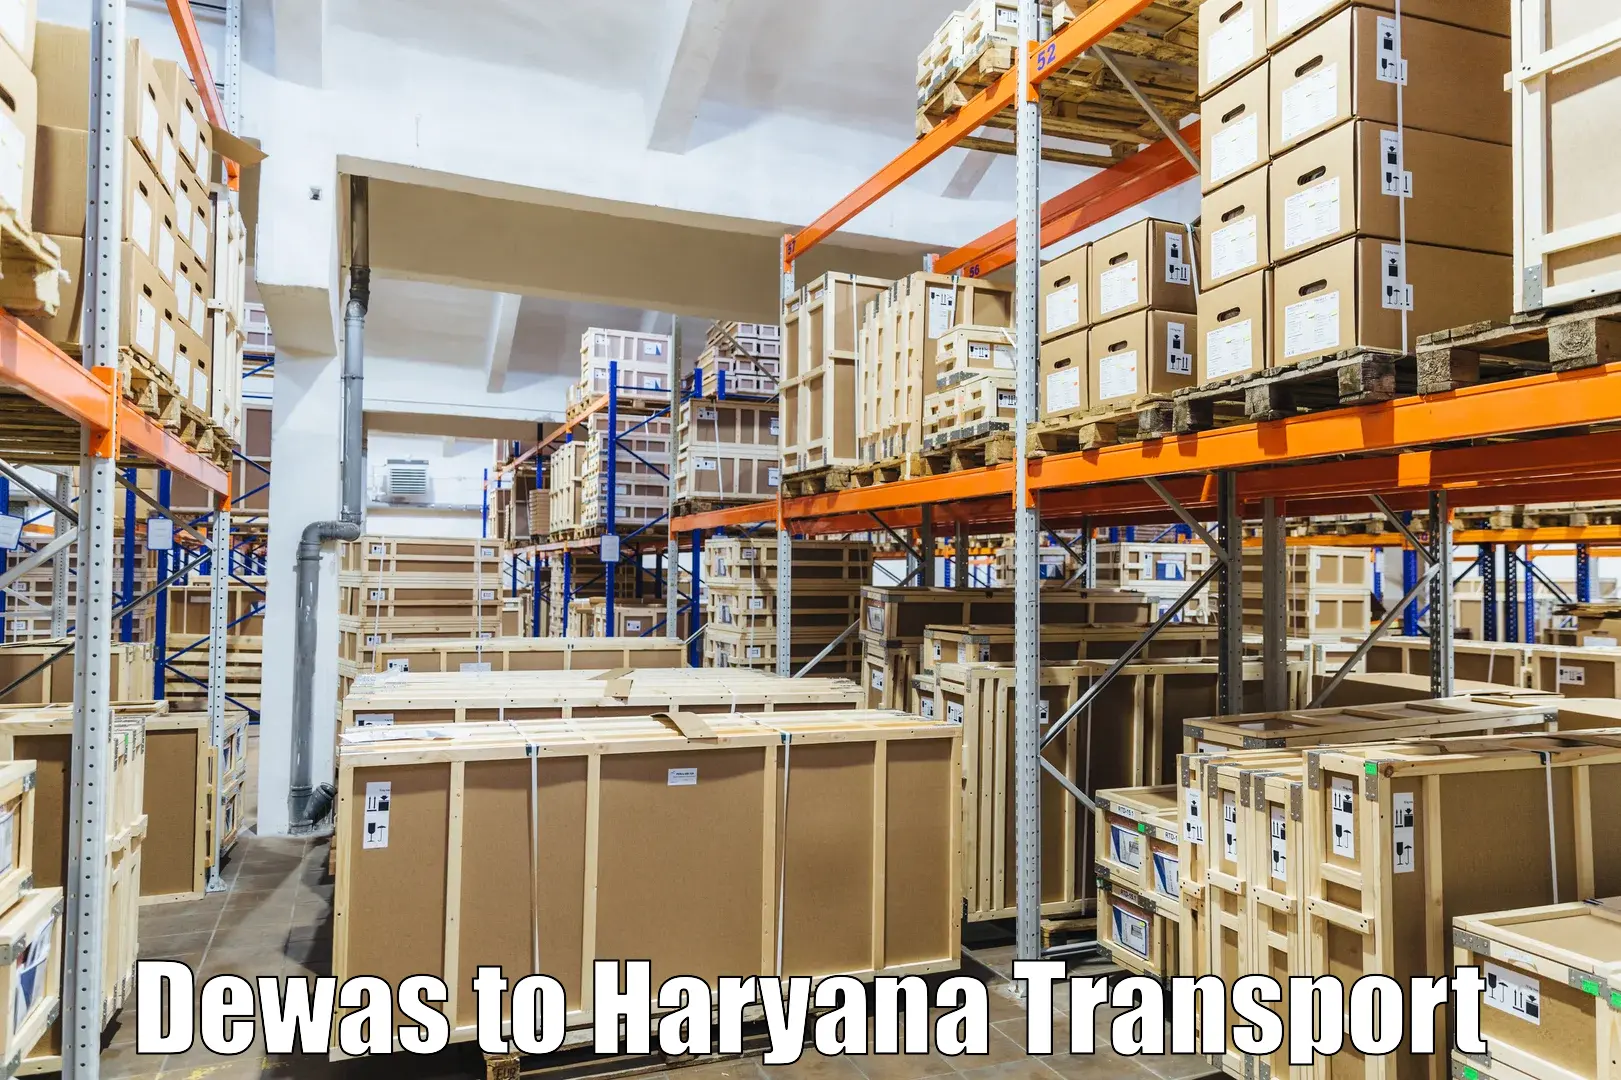 Container transport service Dewas to NCR Haryana